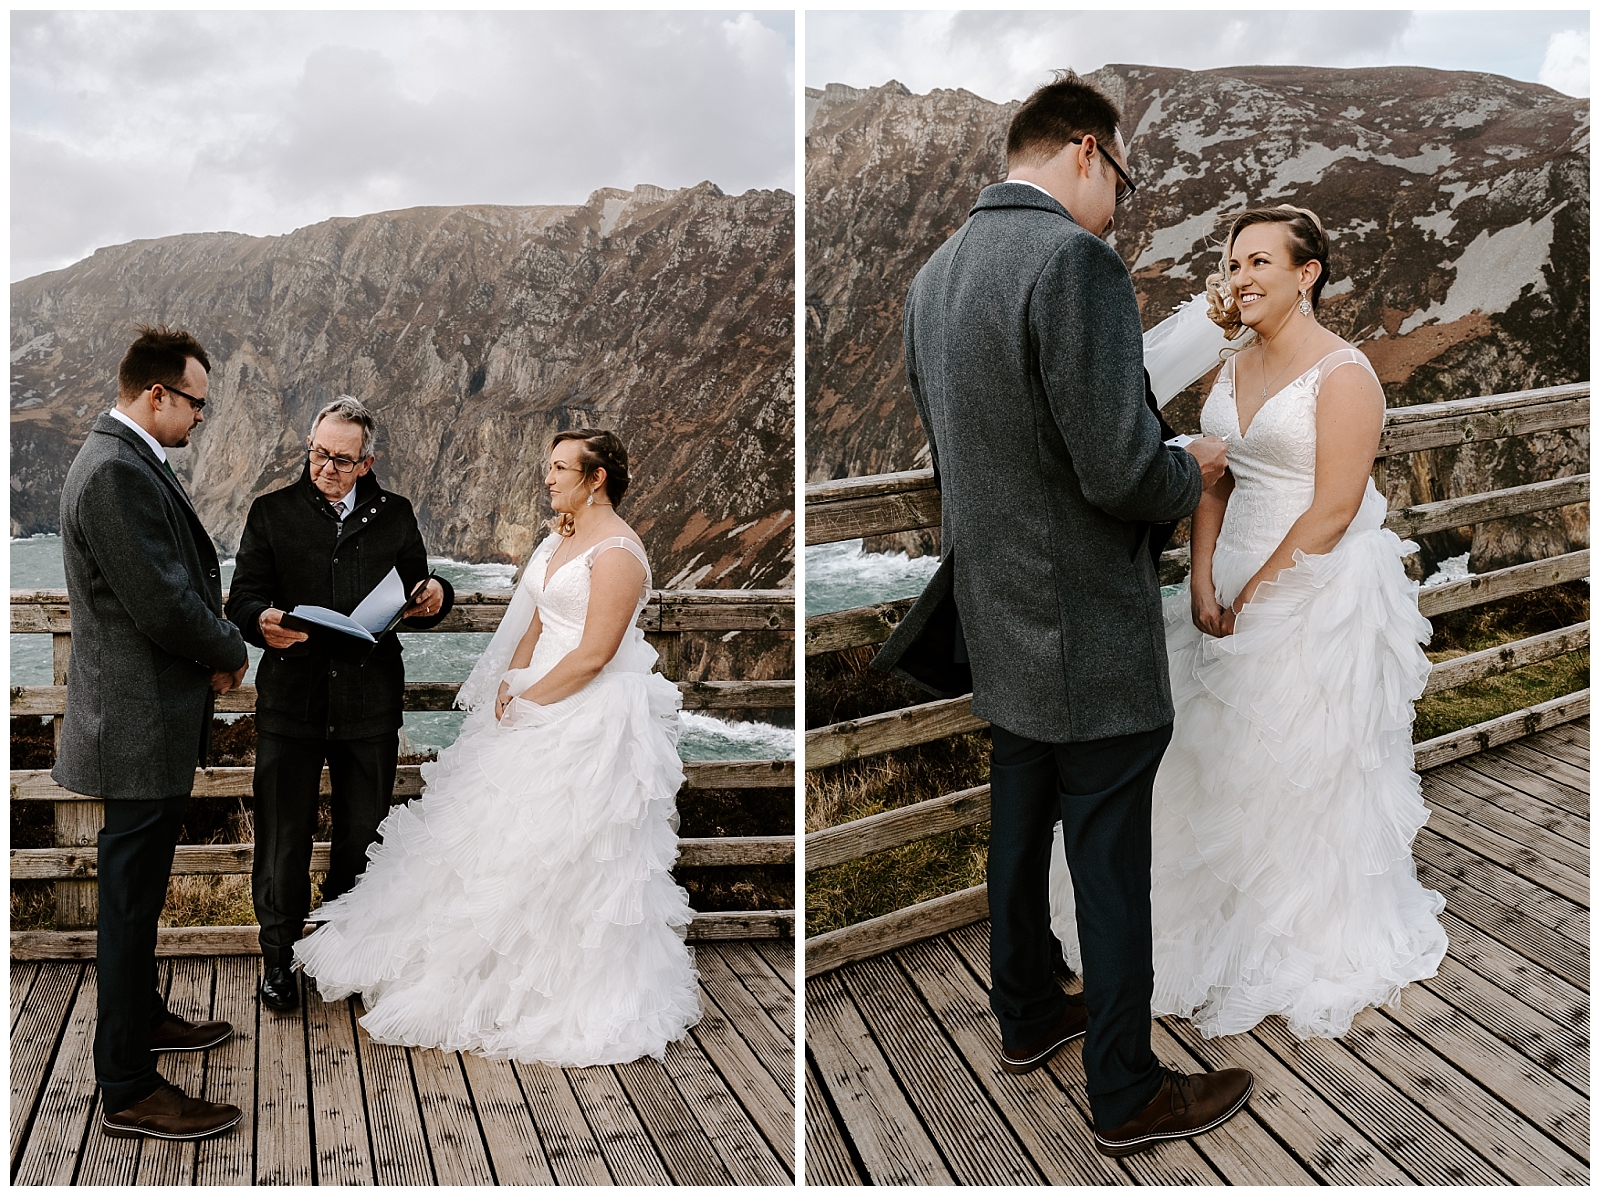 Beautiful couple eloping in Ireland as they say their vows.